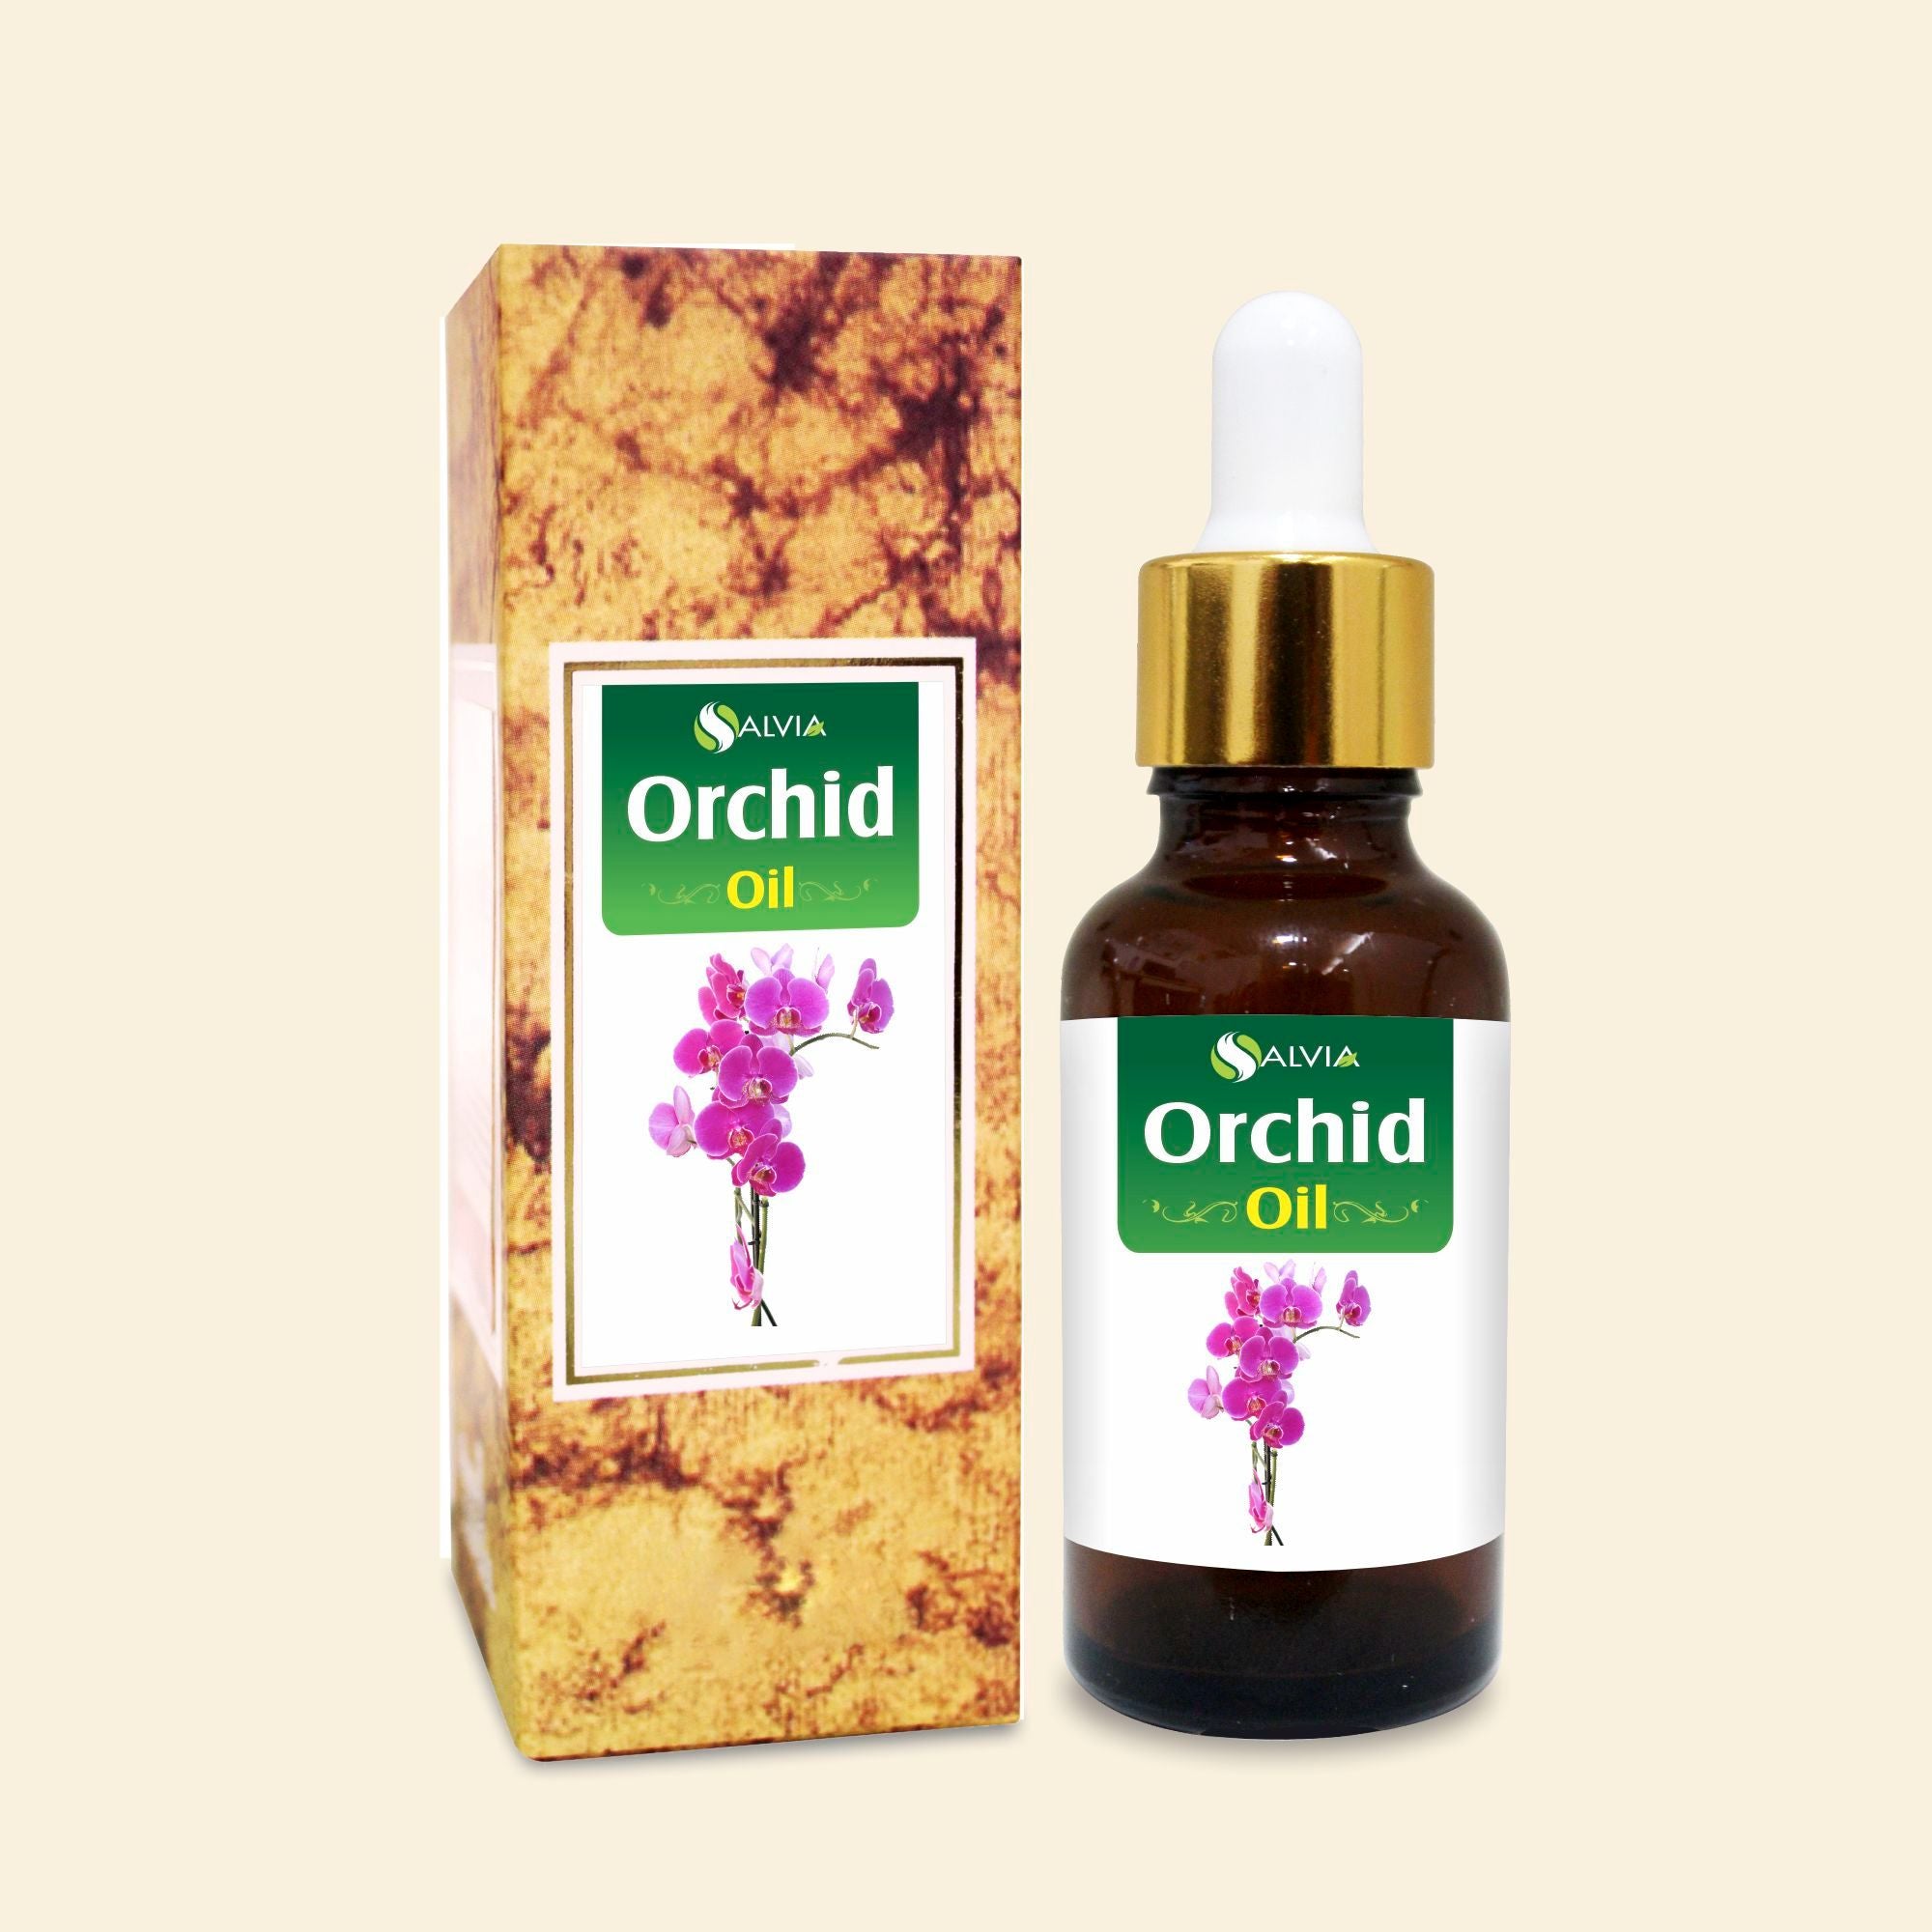 Salvia Natural Essential Oils Orchid Oil (Nelumbo nucifera)| Pure And Natural Oil